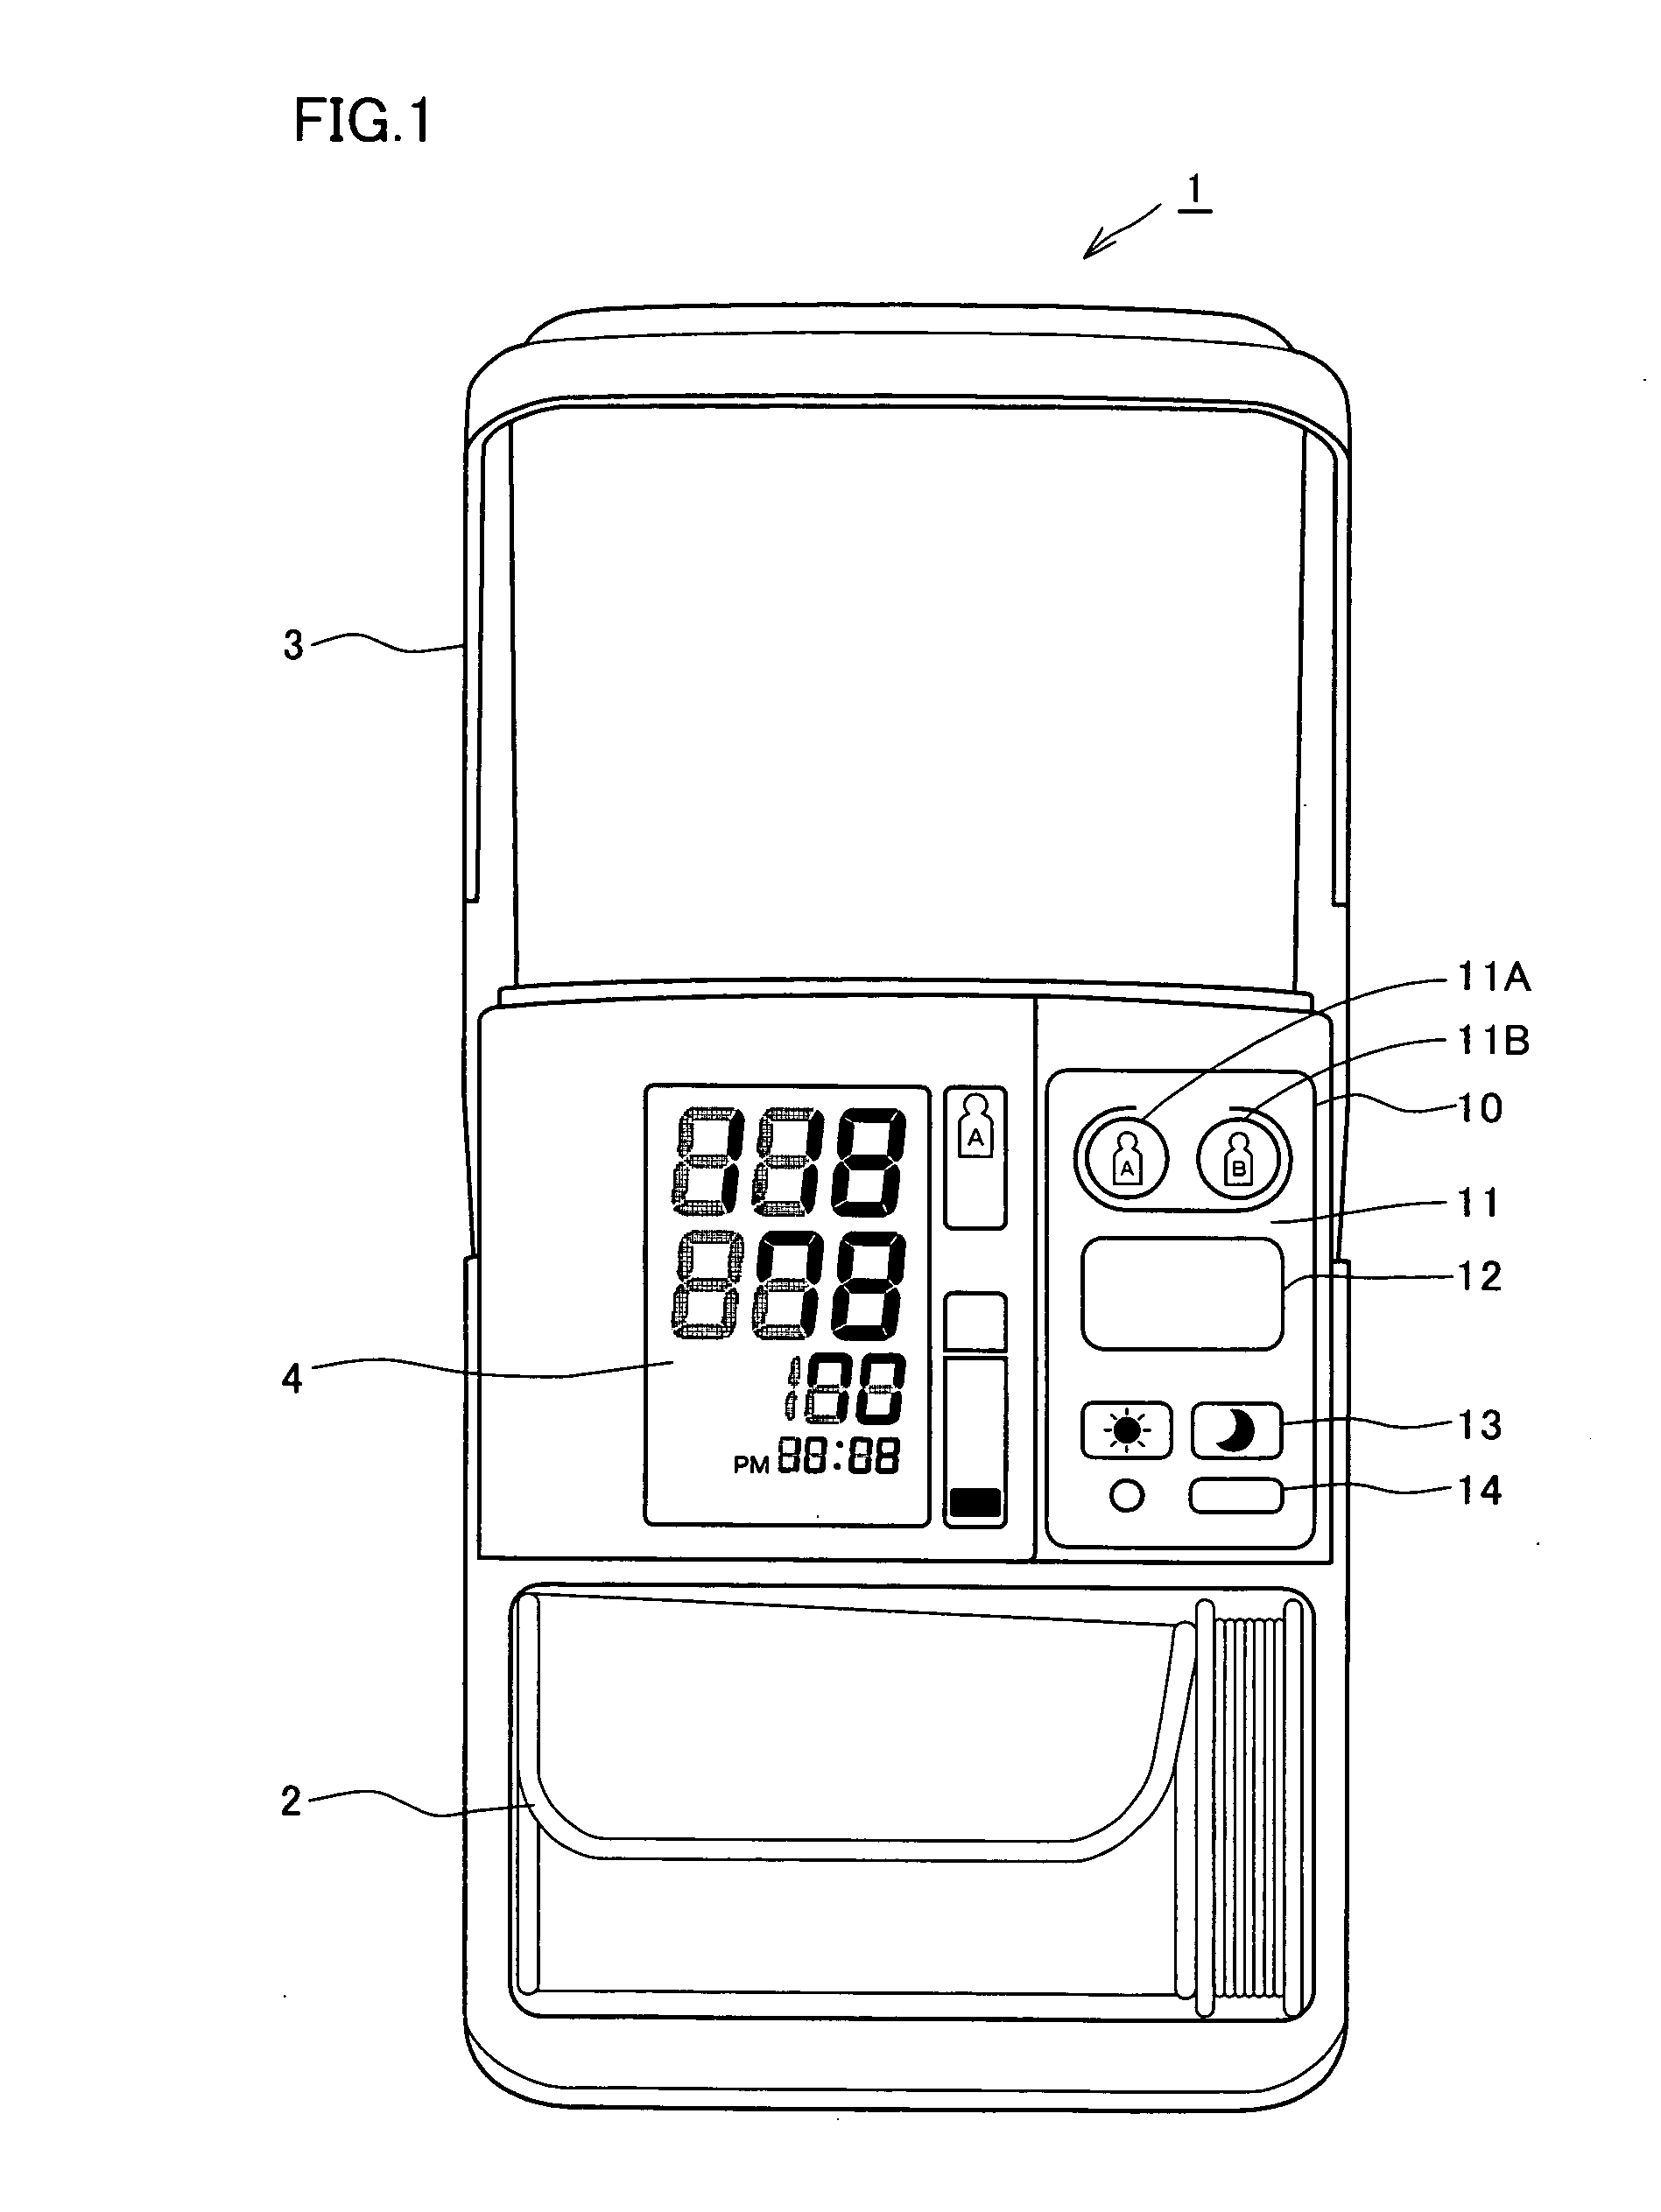 Blood pressure monitor capable of managing measurement value of multiple users